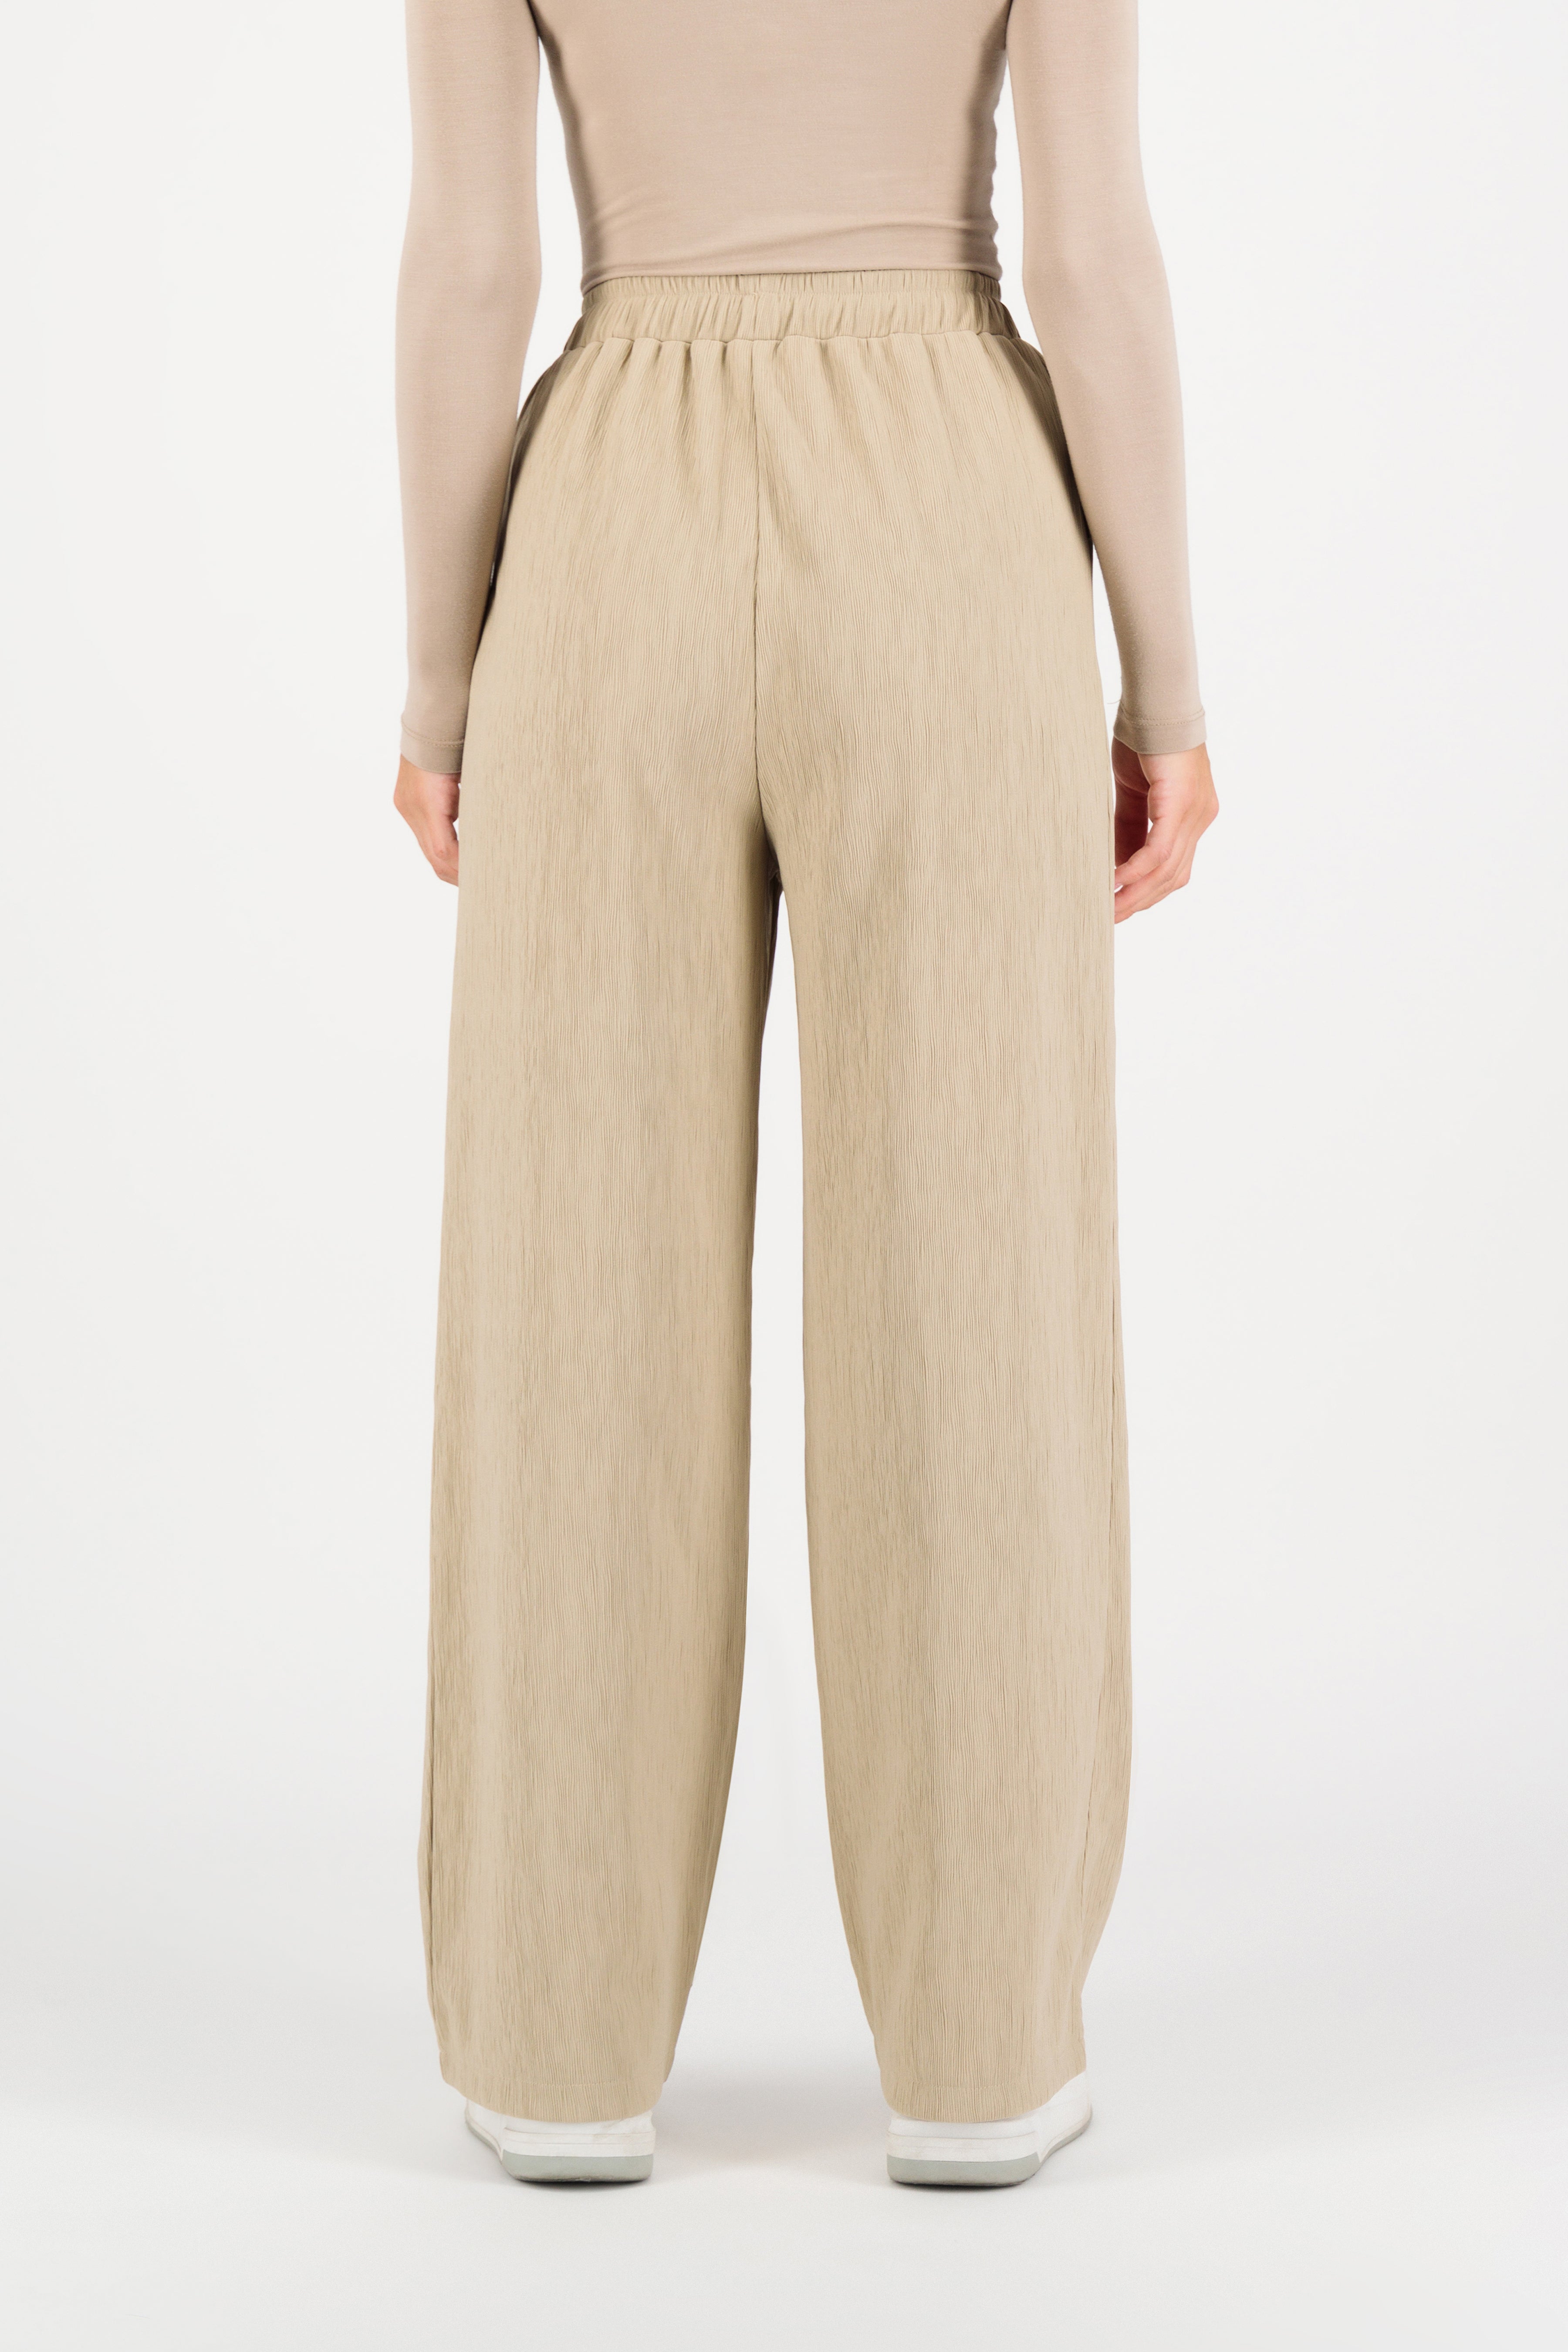 CA - Wavy Relaxed Fit Pants - Sand